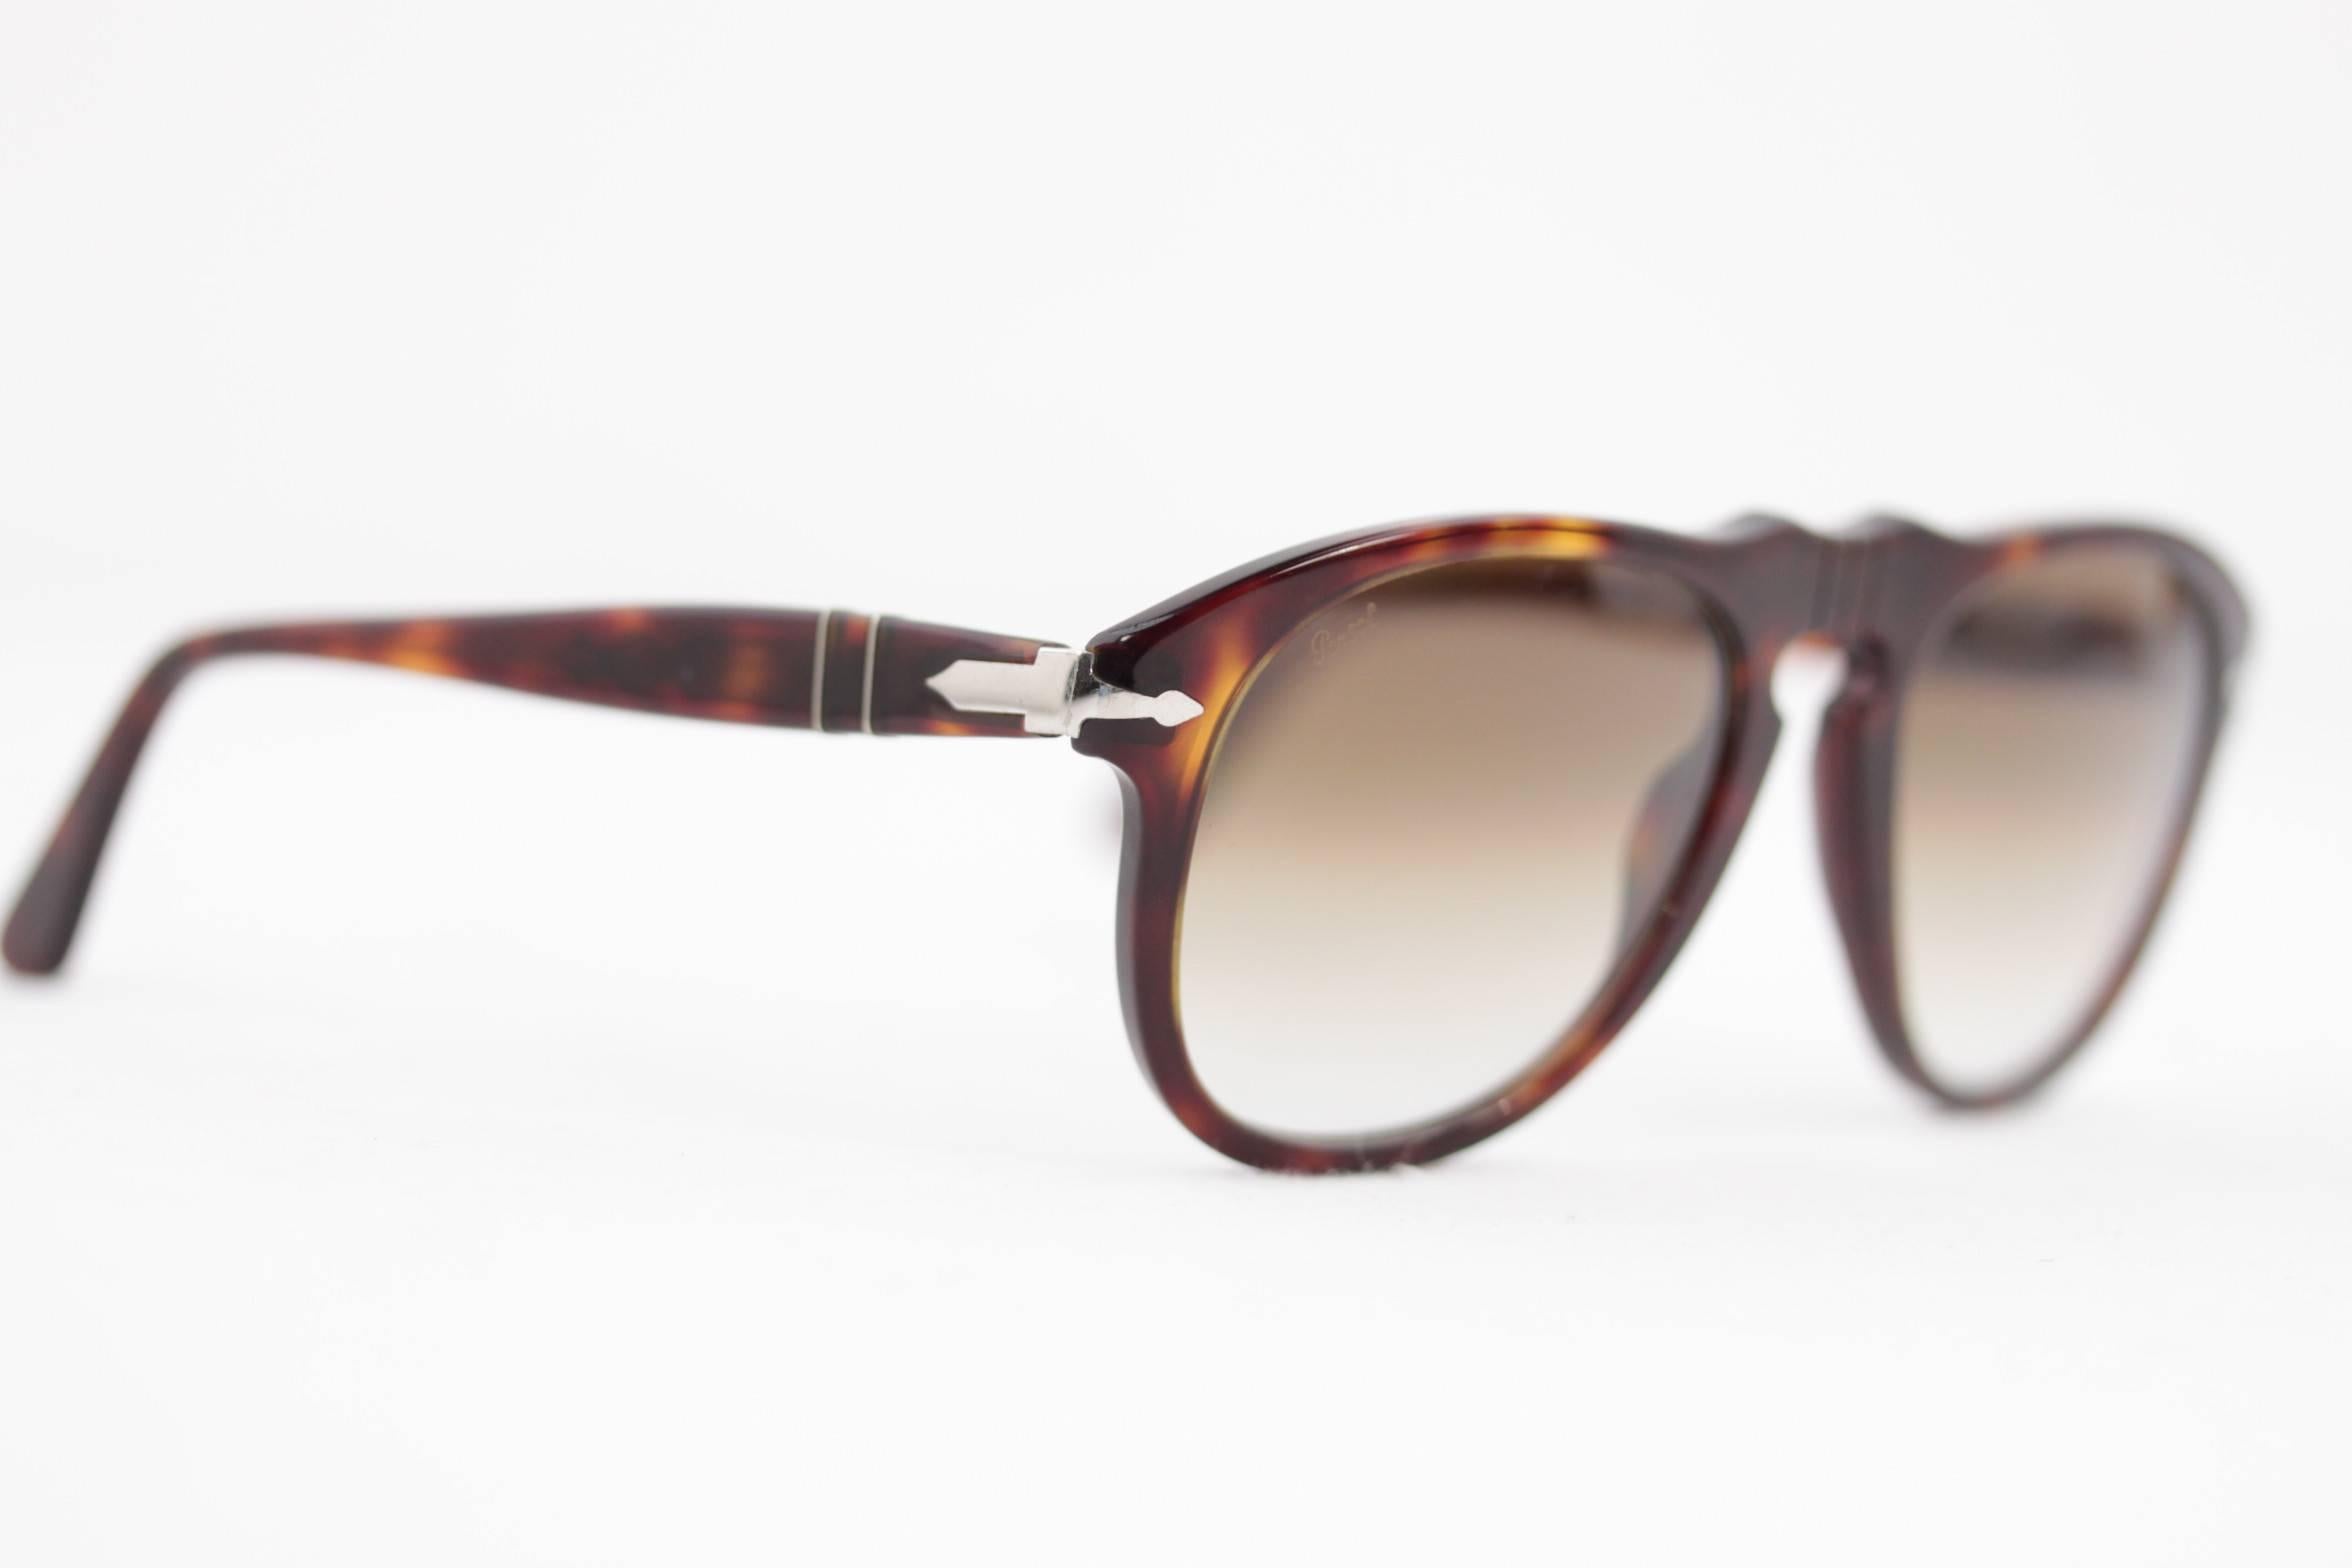  - Legendary movie sunglasses by PERSOL RATTI, mod. 649
- Brown/ tortoise frame
- Original 100% UV protection brown gradient lenses (PERSOL logo on right lens)
- Flexible temple (thanks to MEFLECTO System)
- Comes with a PERSOL case

Any other